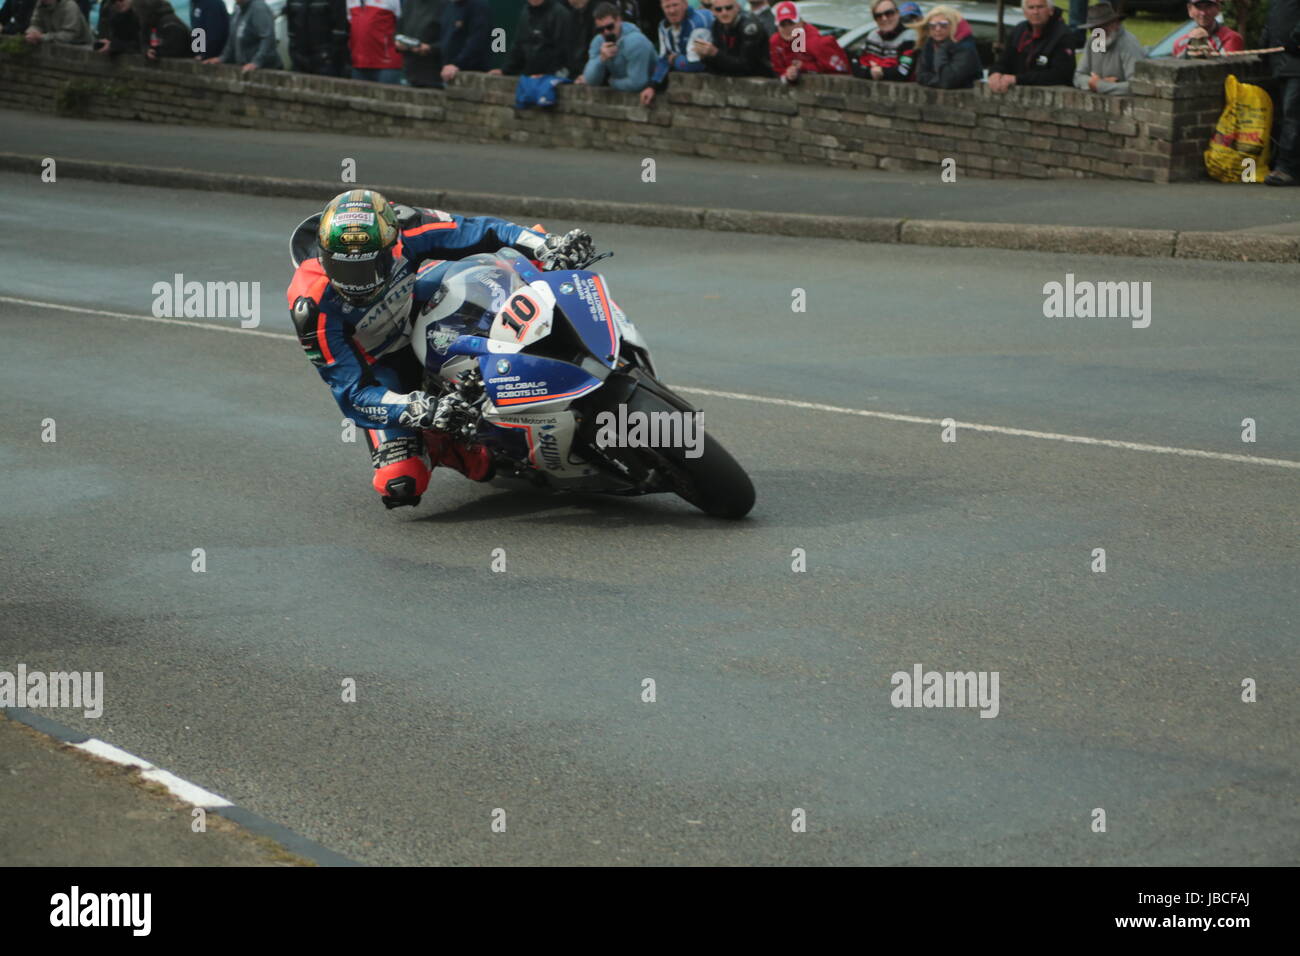 Isle Of Man, British Isles (UK). 9th June, 2017.  Fan Favorite and rising star, number 10, Peter Hickman on his BMW motorcycle of the Smiths Racing team at Cruickshank's Corner, Ramsey, Isle of Man, UK.  Peter Hickman came second in the Senior TT race in an exciting climax to the TT Races. Pokerstars Senior TT Race. (Detailed competitor information: https://www.iomtt.com/TT-Database.aspx) Credit: Louisa Jane Bawden/Alamy Live News. Stock Photo